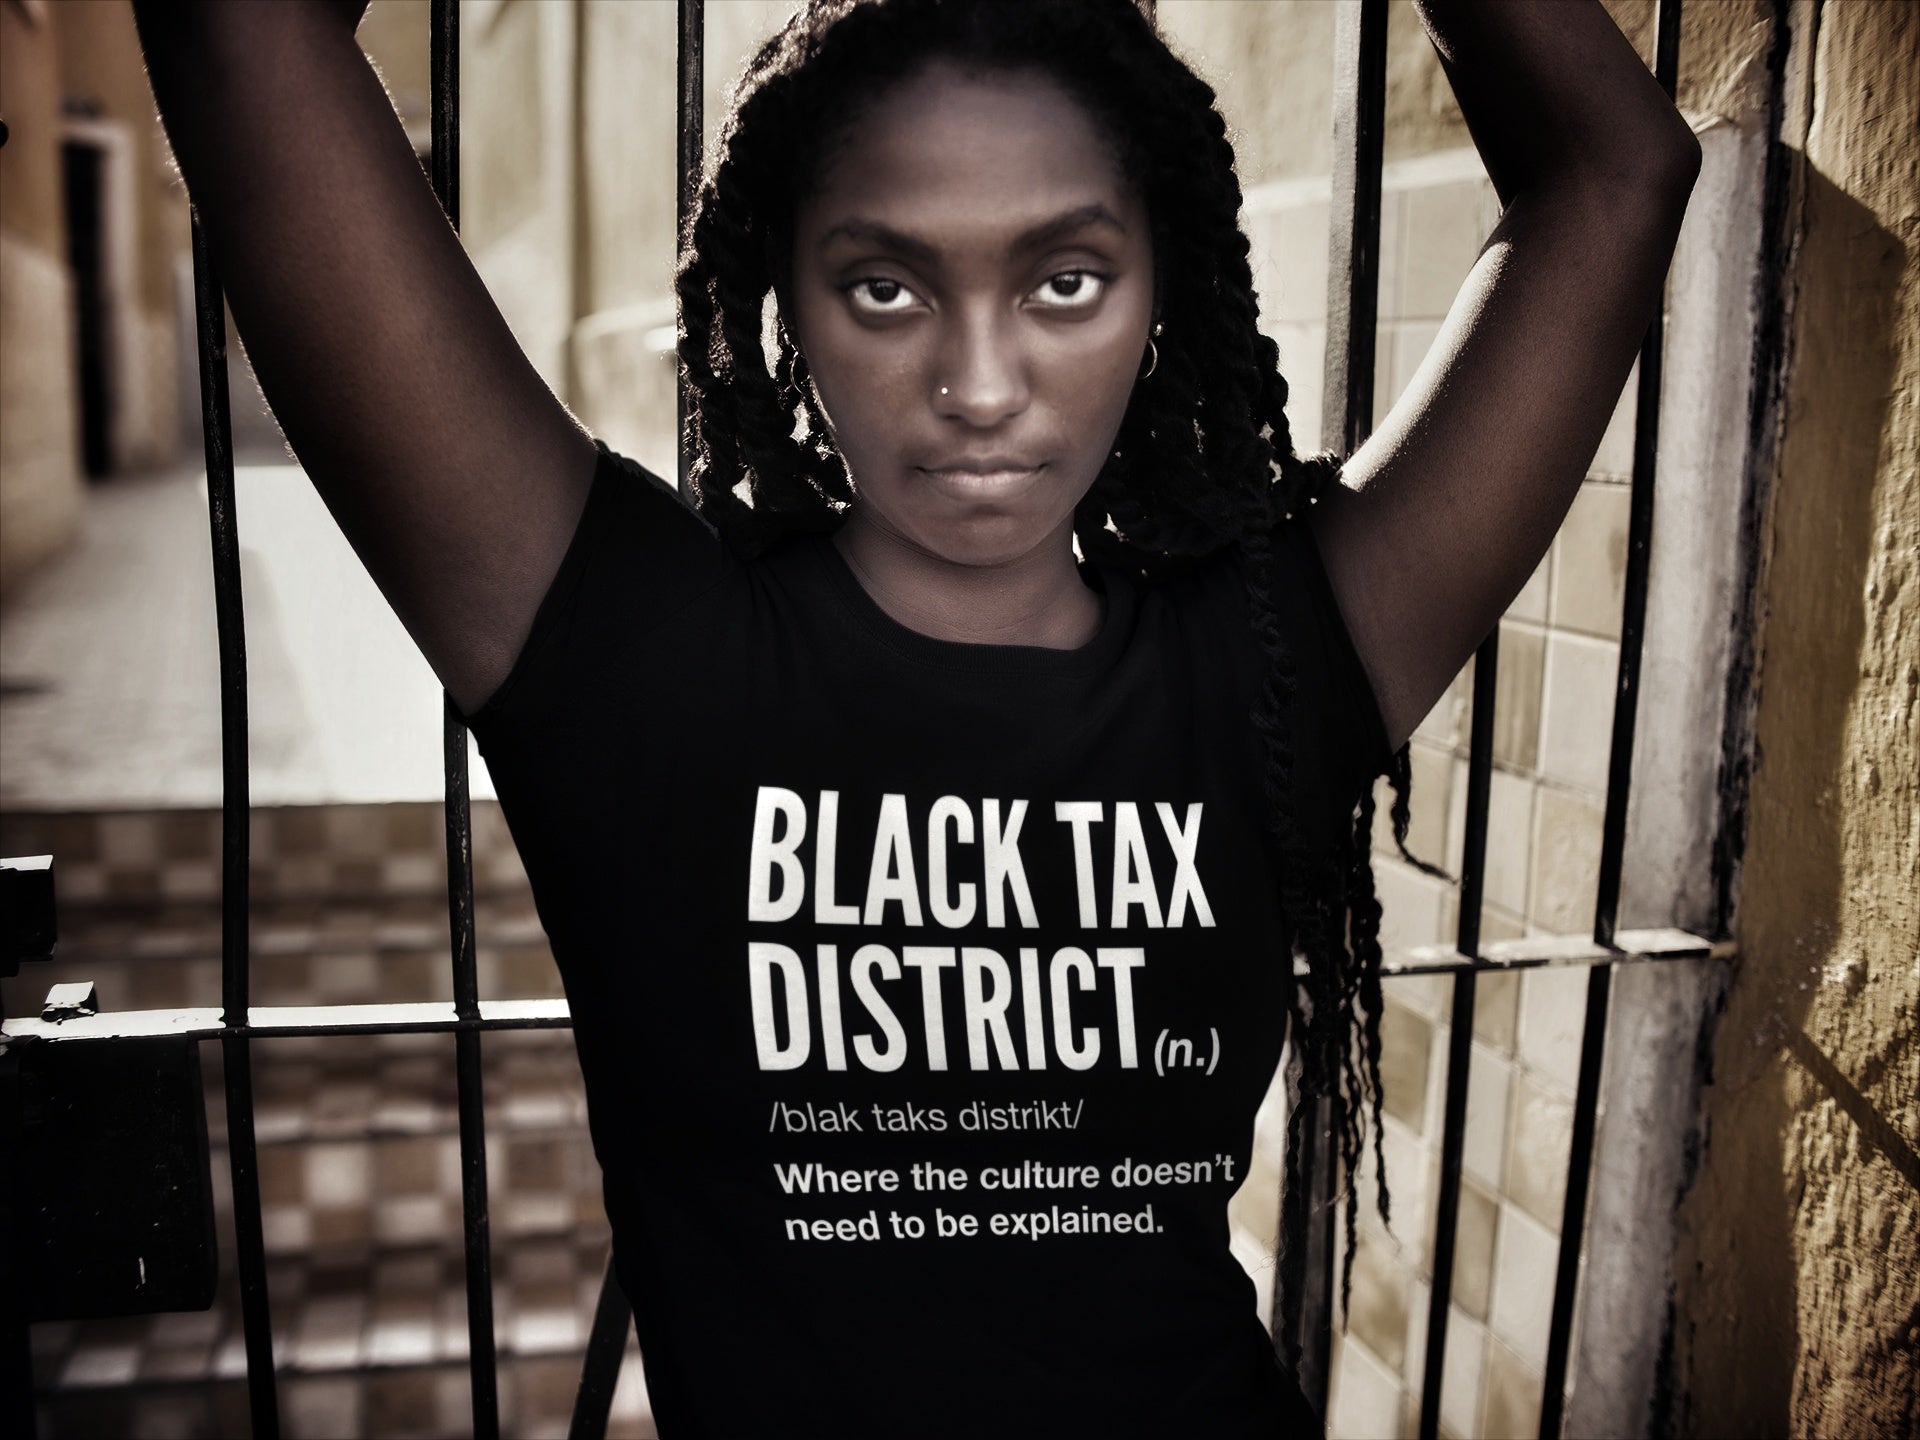 Welcome to the Black Tax District